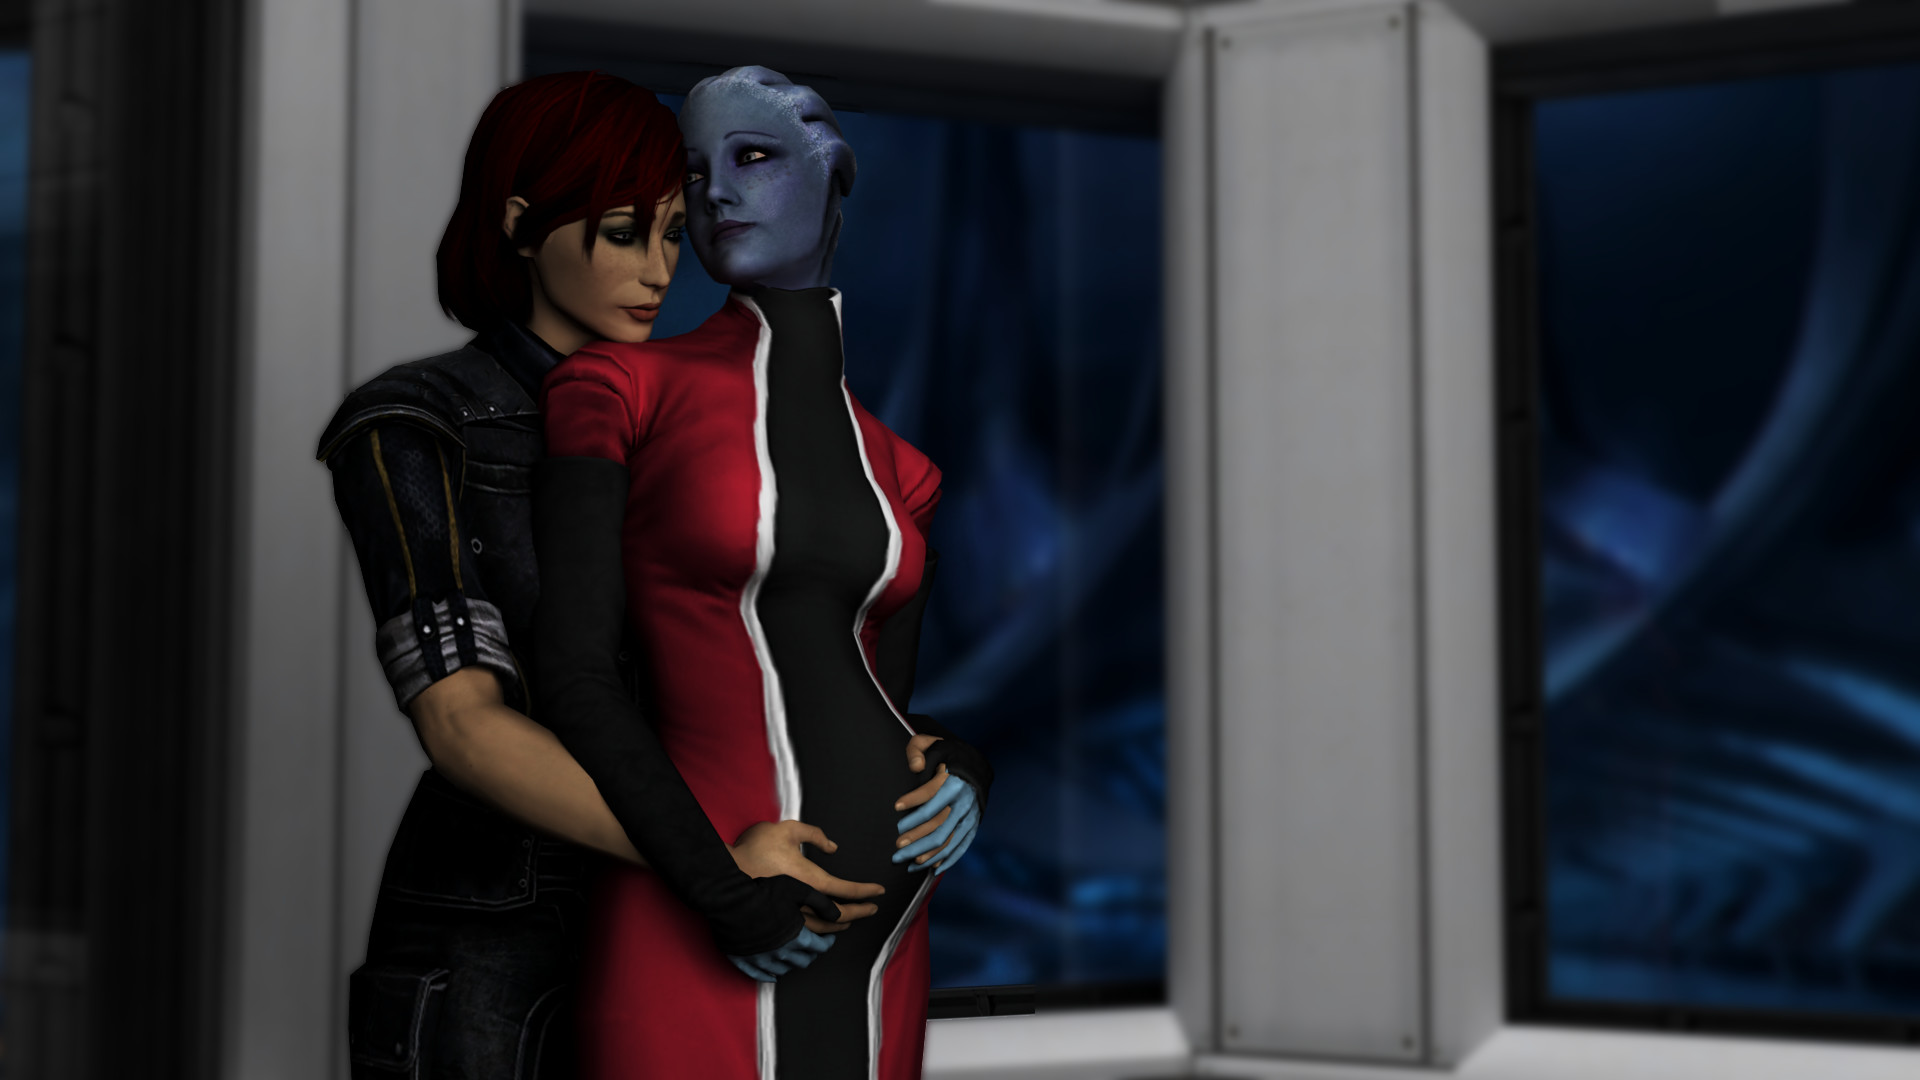 A Shepard and Liara legacy by neehs.